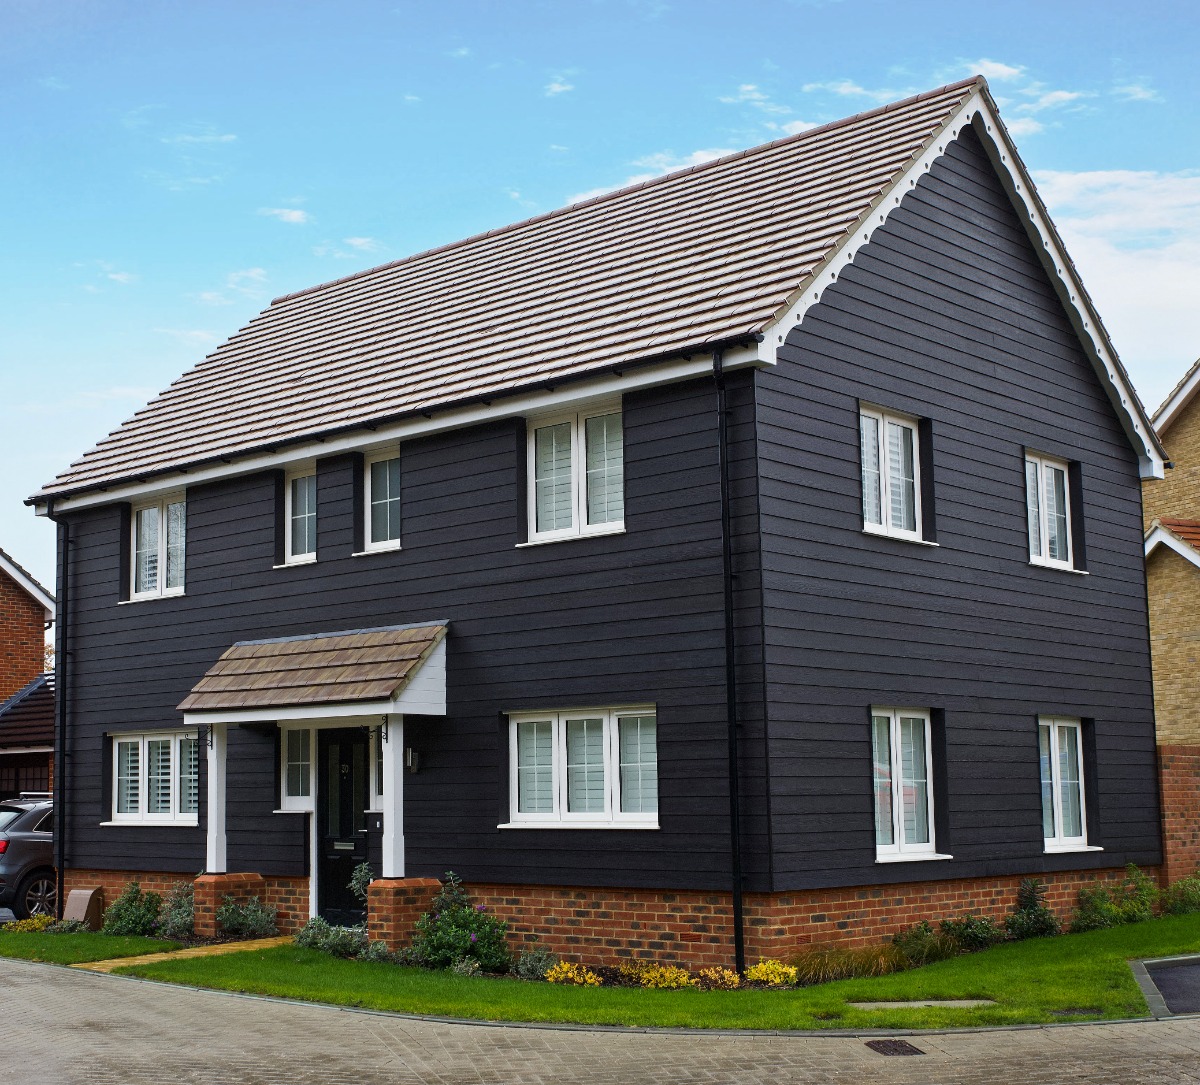 NEW BUILD FAMILY HOMES HIGHLY PRIZED IN FACE OF ‘ACUTE SHORTAGE’